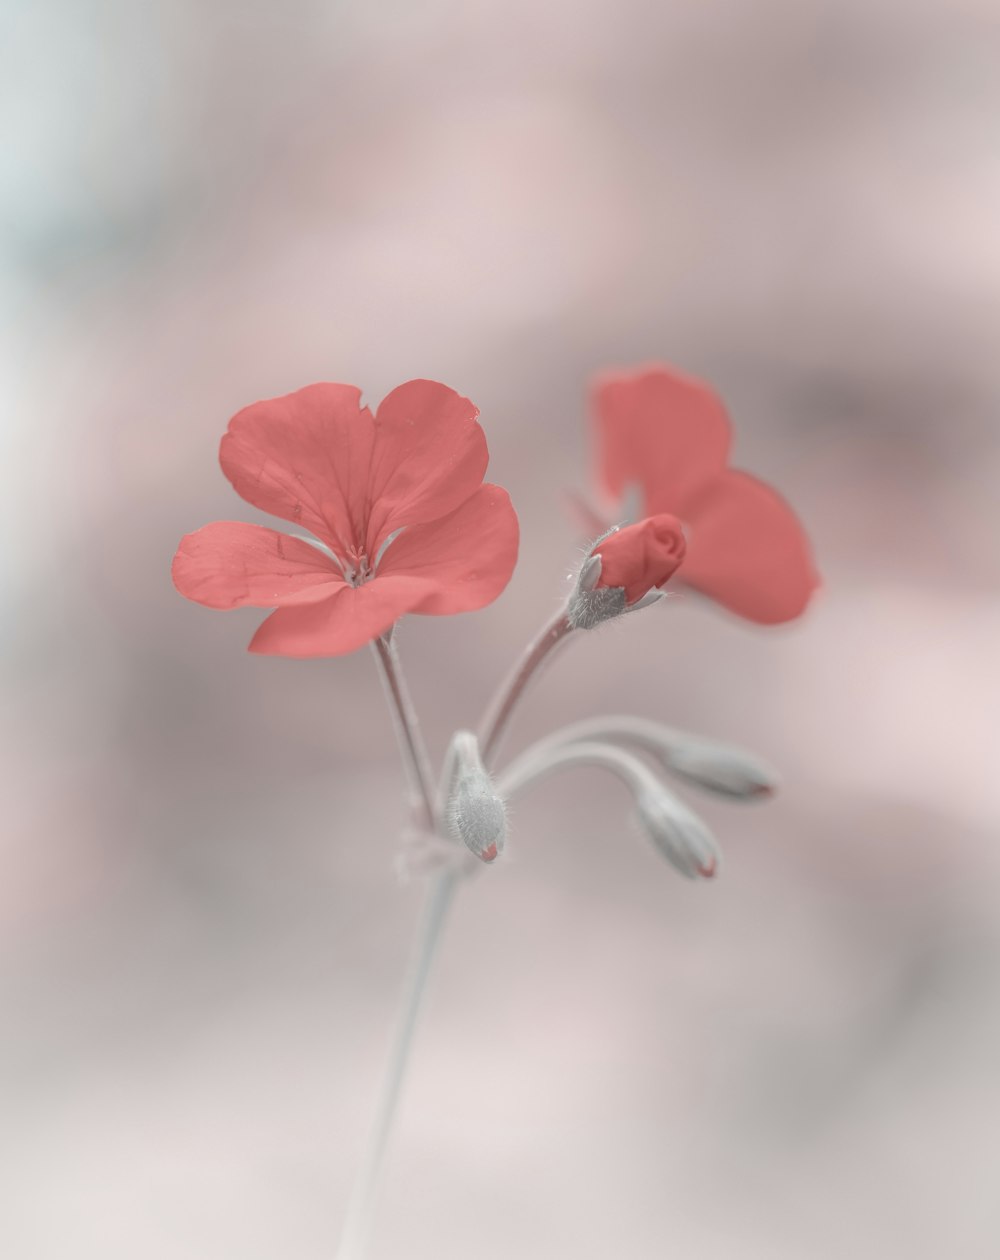 shallow focus of red flowers